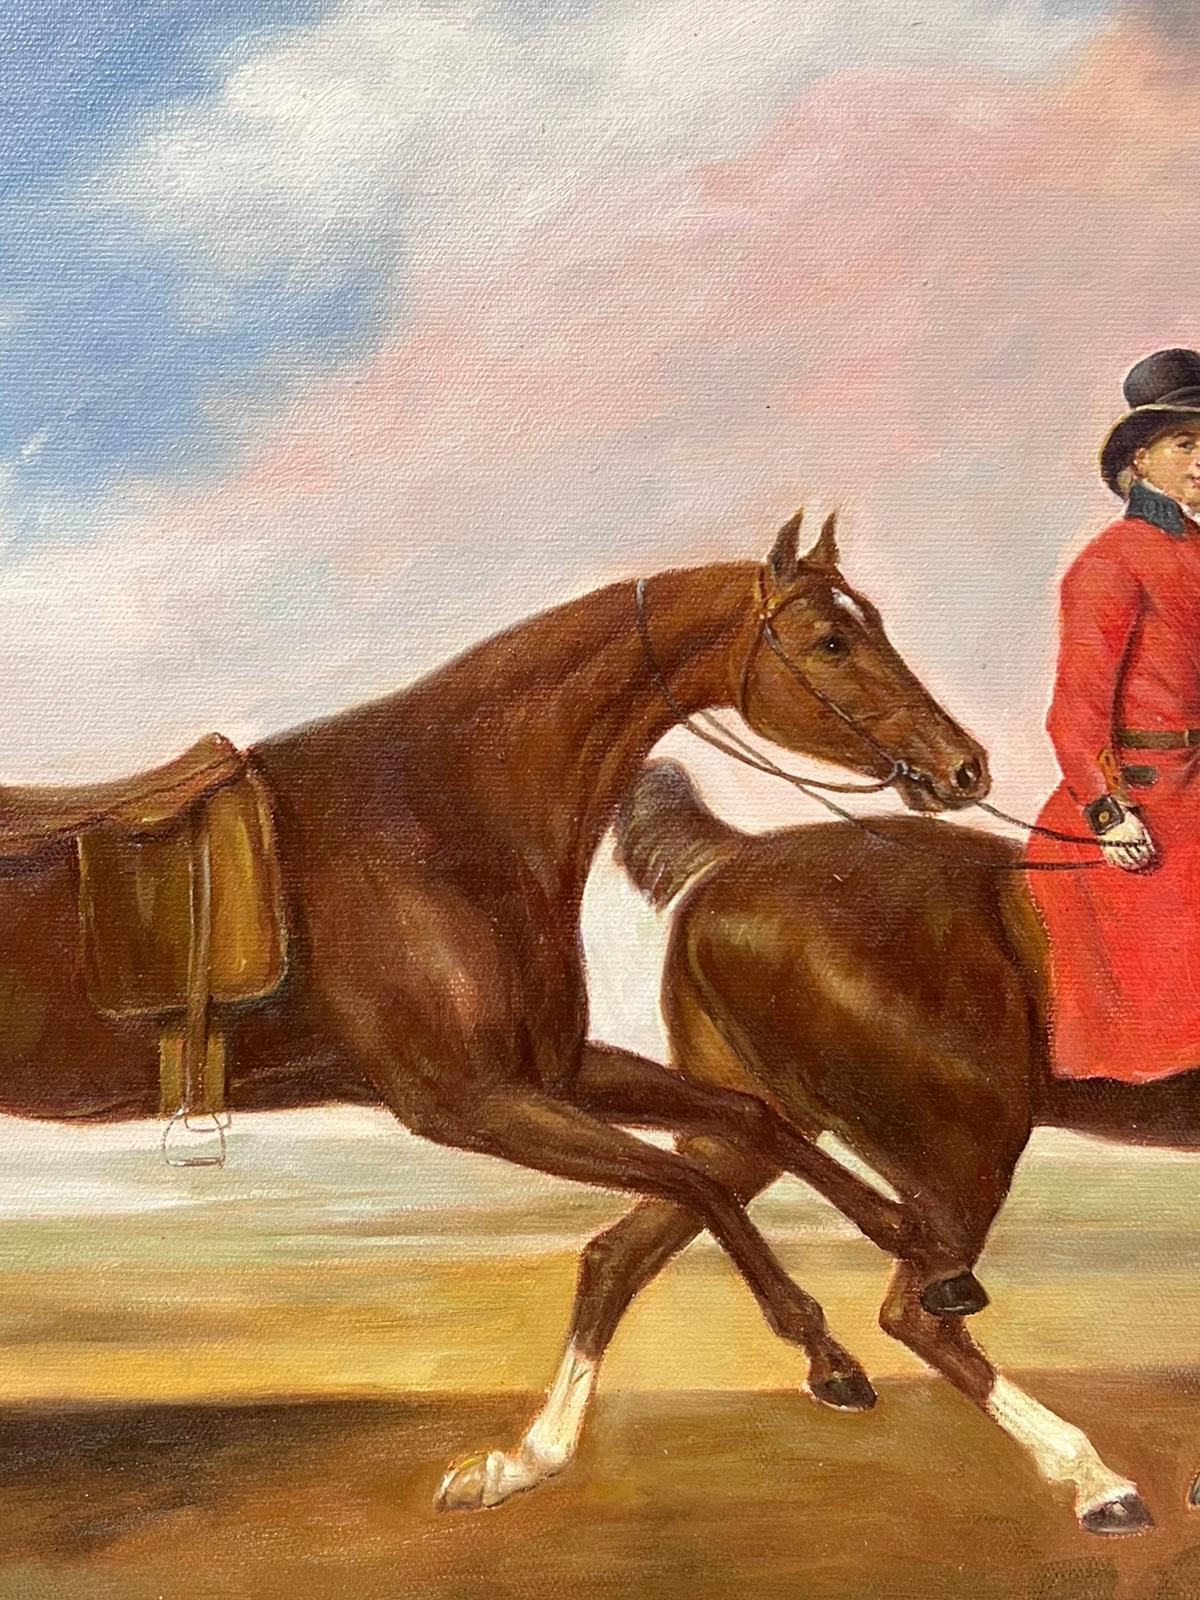 Large Sporting Art Oil Painting Rider on Horseback with Another Horse framed For Sale 6